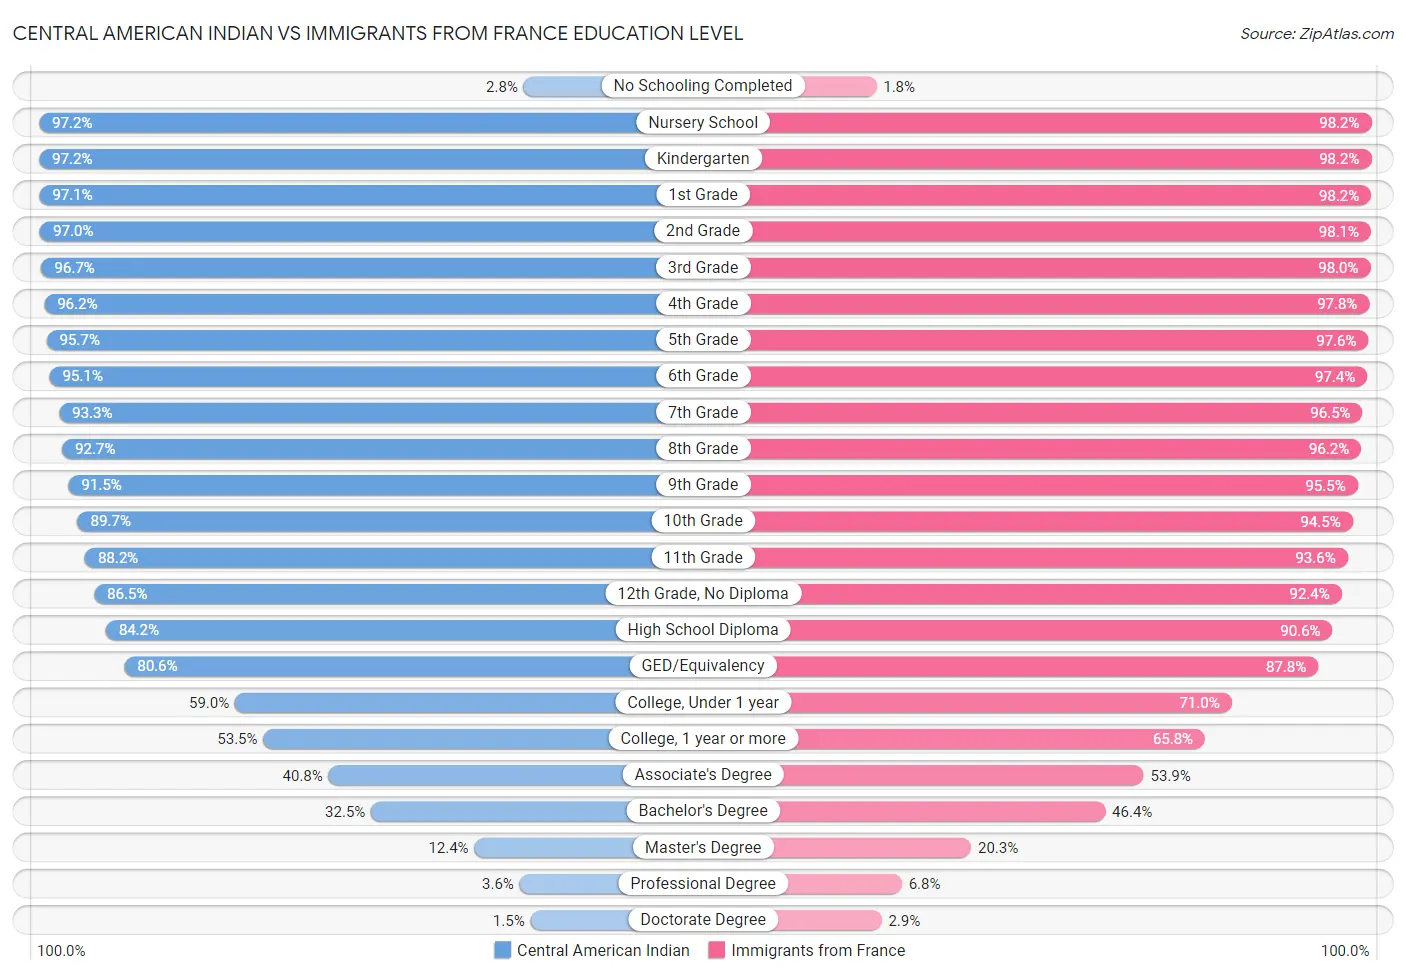 Central American Indian vs Immigrants from France Education Level